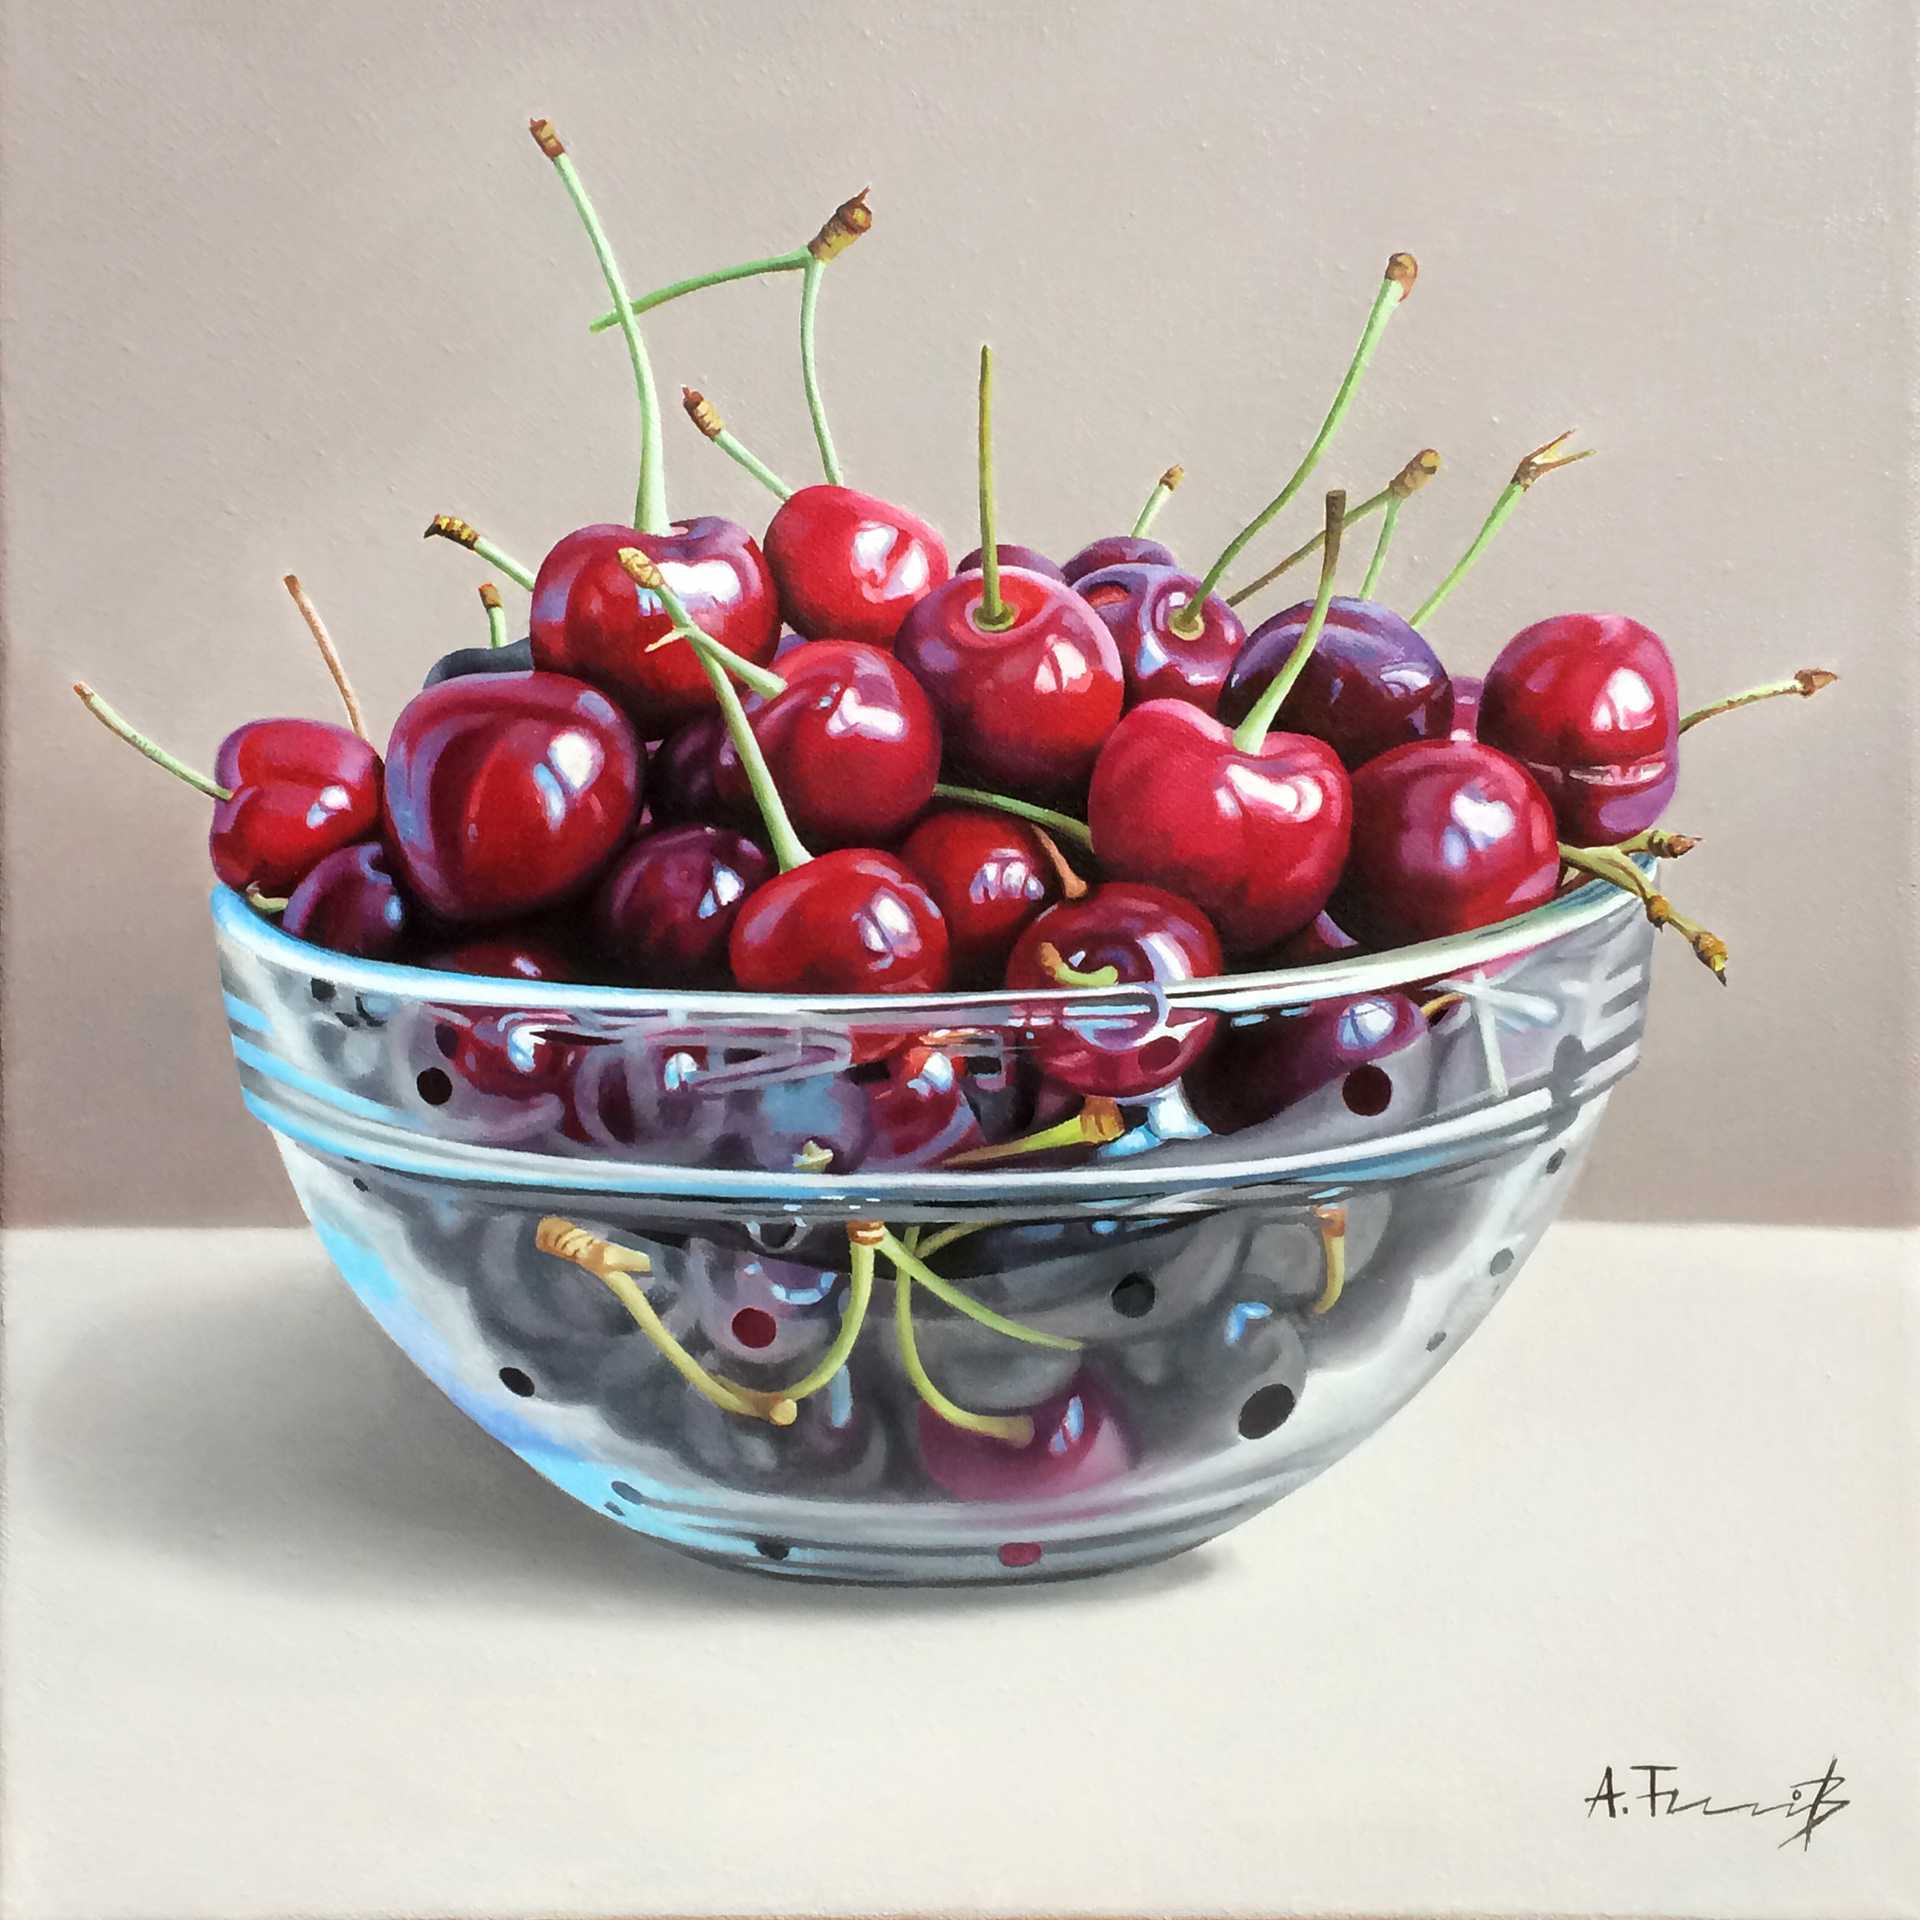 Cherries in a Glass Bowl